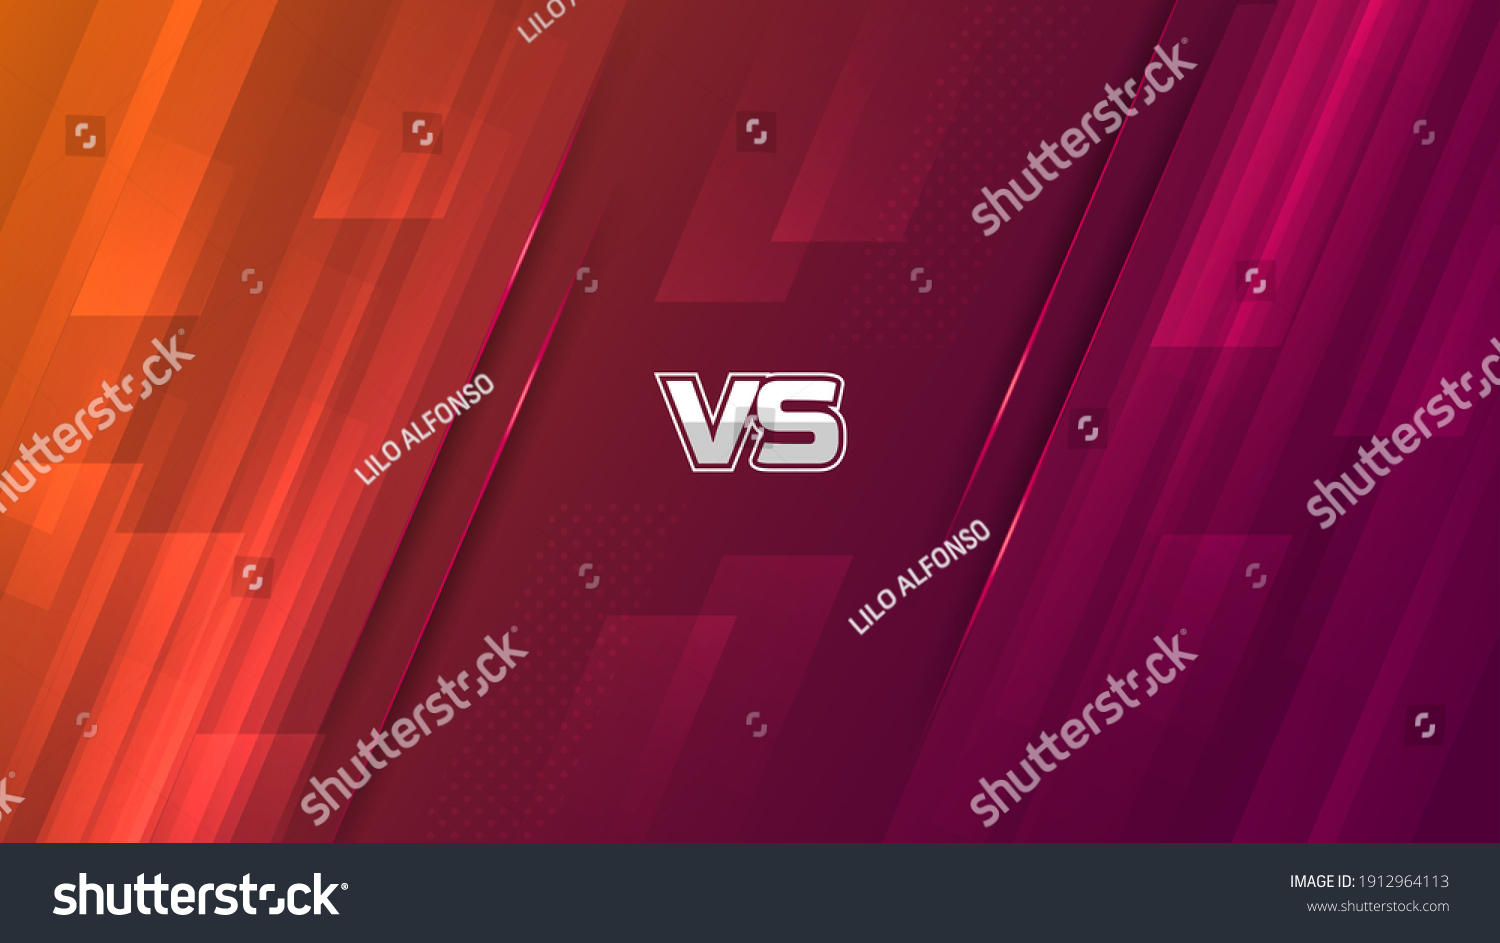 SVG of Modern versus background with rays effects svg